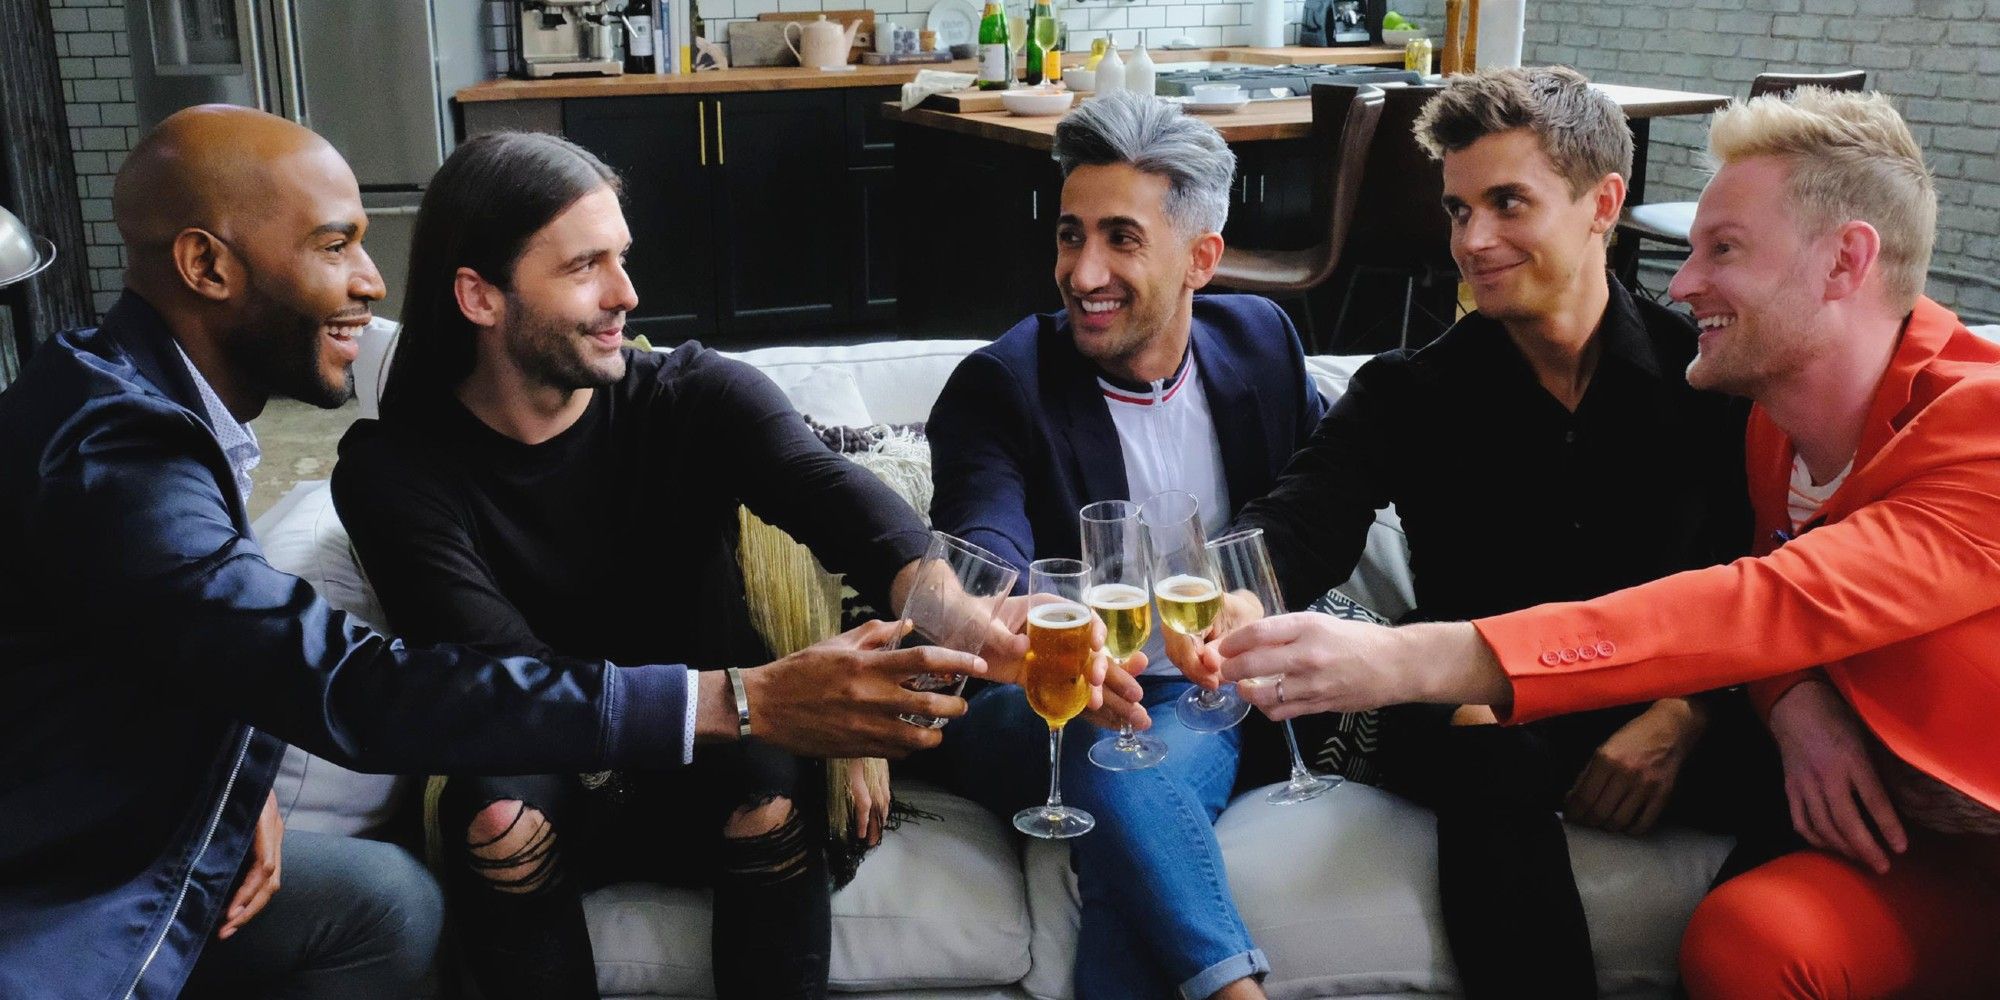 The Fab Five toast with champagne on Netflix's Queer Eye.